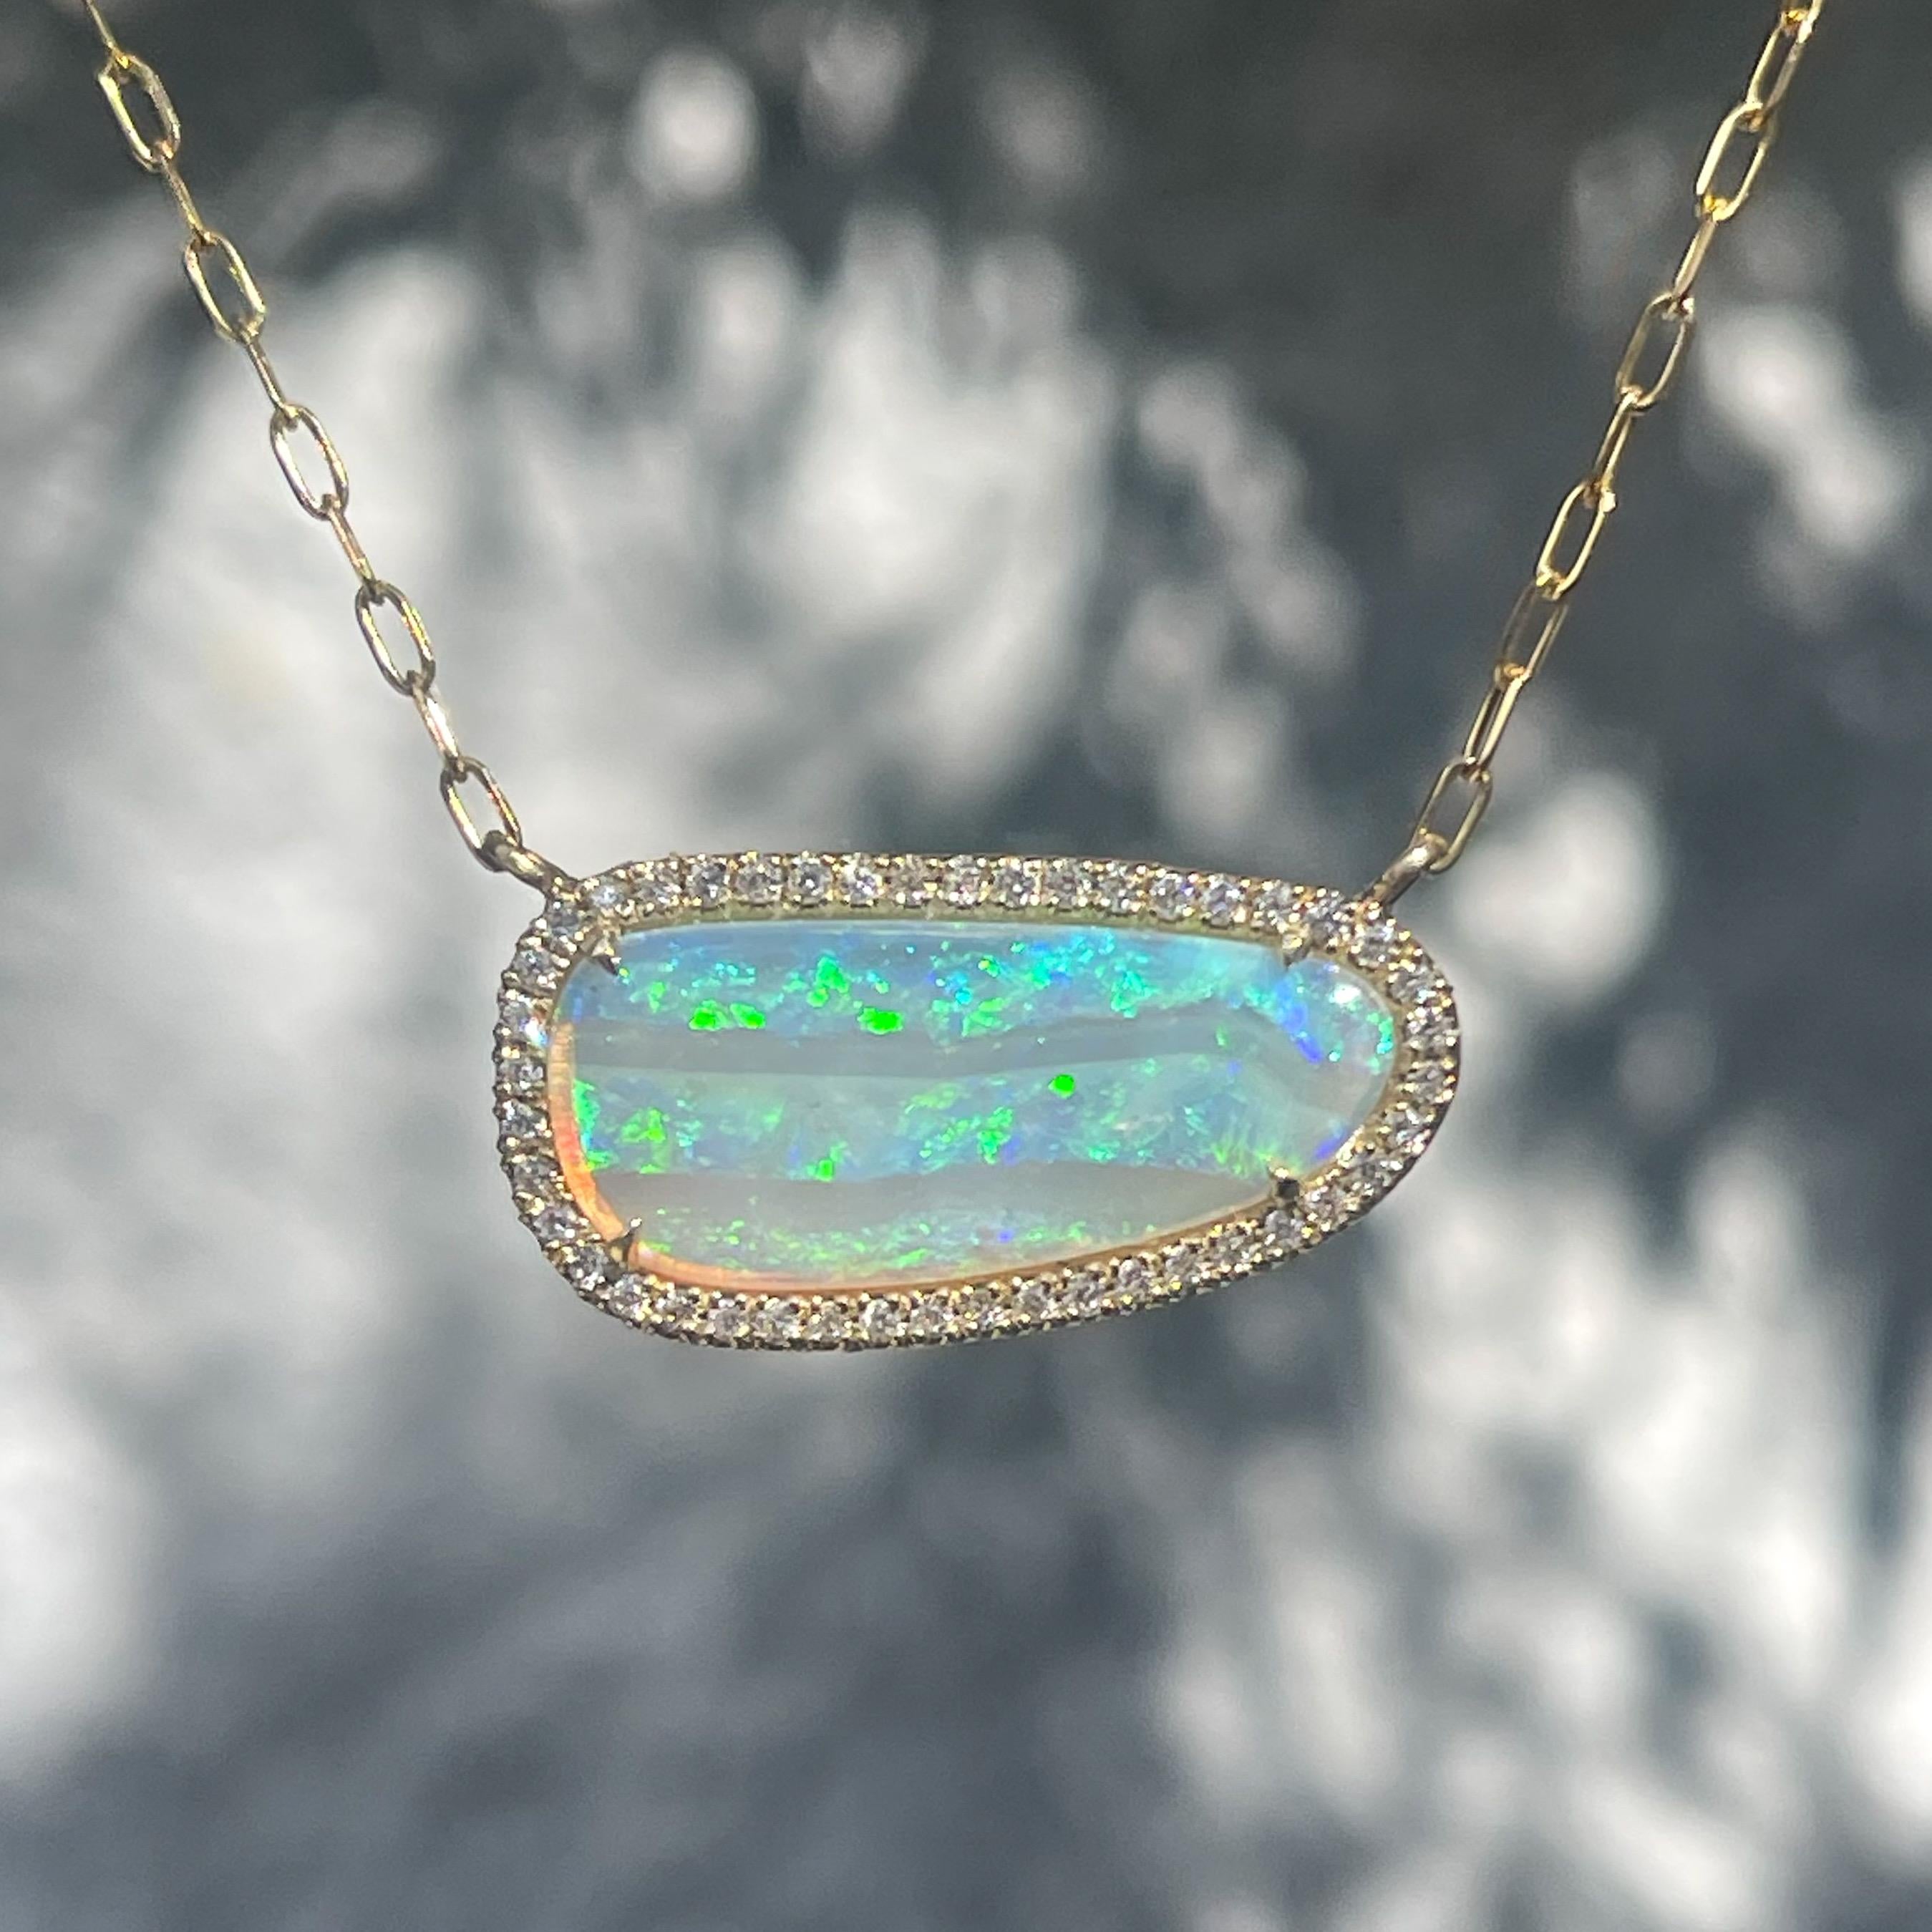 Alpine Reverie Australian Opal Necklace with Diamonds in 14k Gold, NIXIN Jewelry In New Condition For Sale In Los Angeles, CA